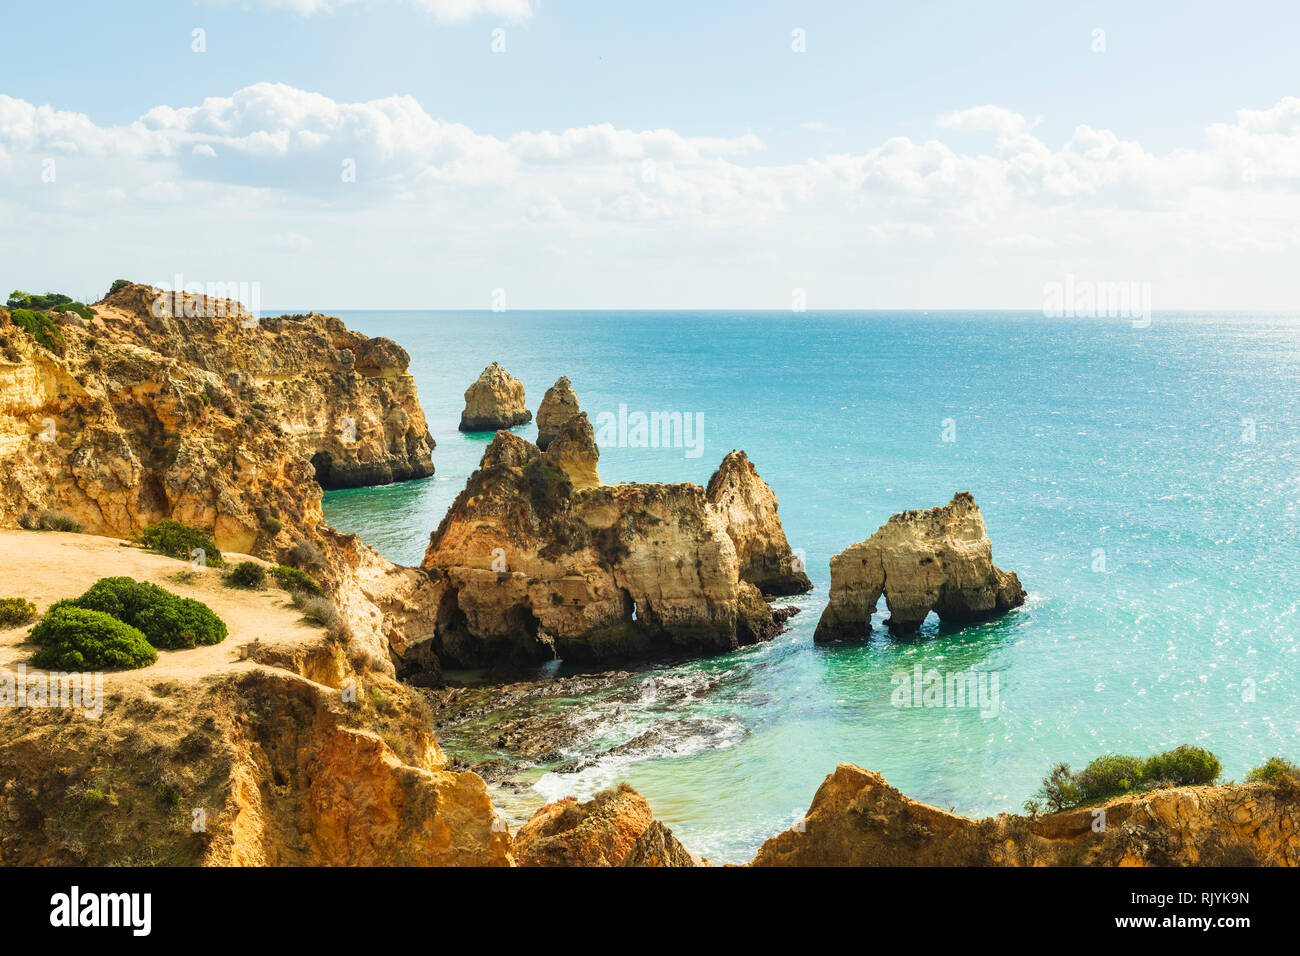 High level view of sea stacks and natural arches, Alvor, Algarve, Portugal, Europe Stock Photo